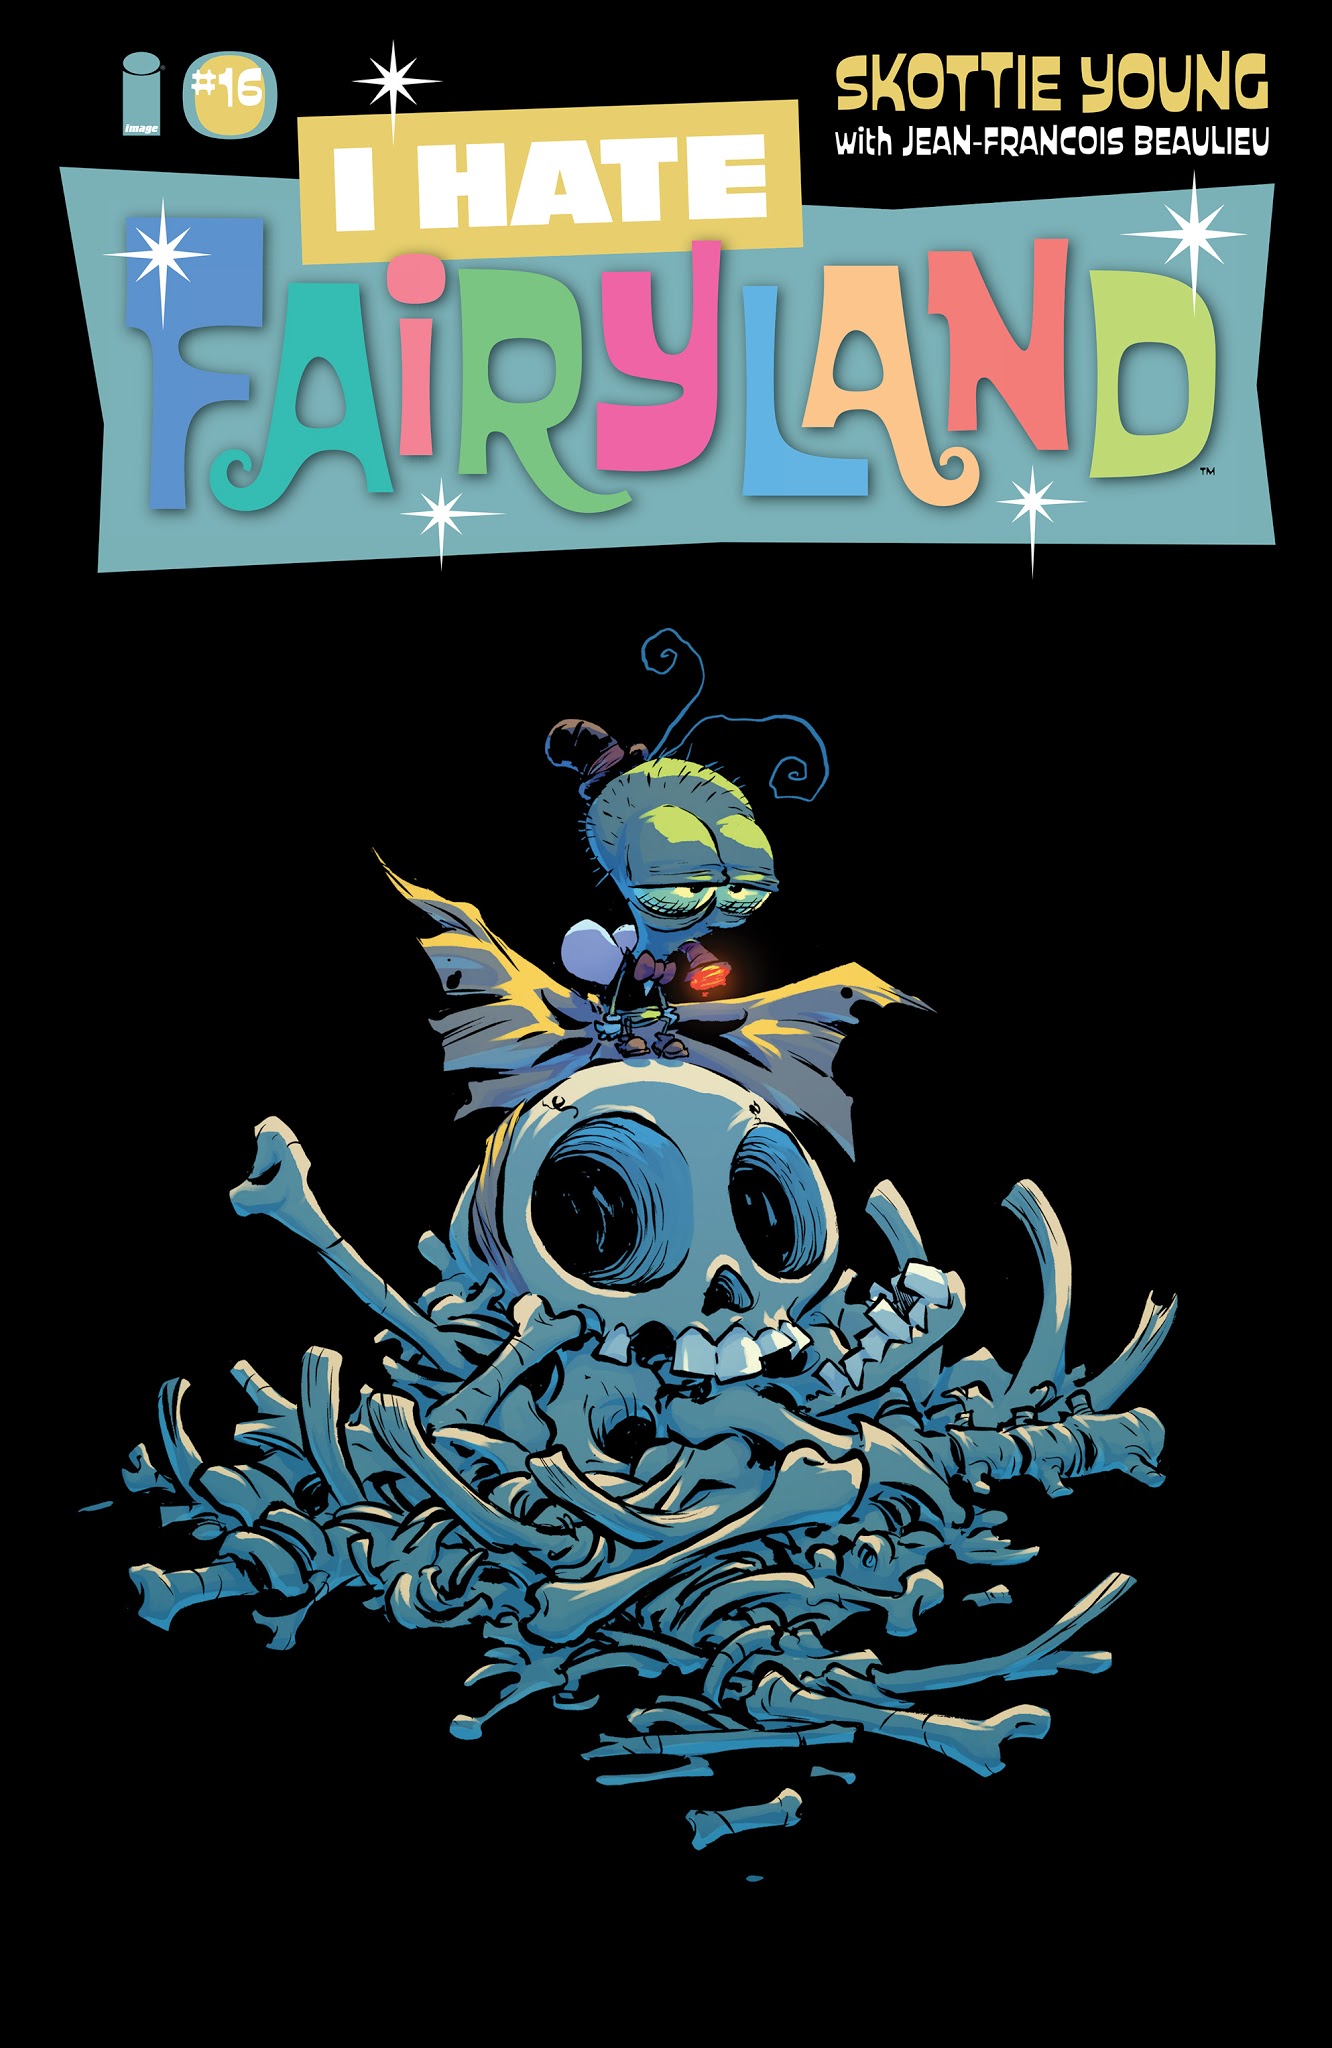 Read online I Hate Fairyland comic -  Issue #16 - 1